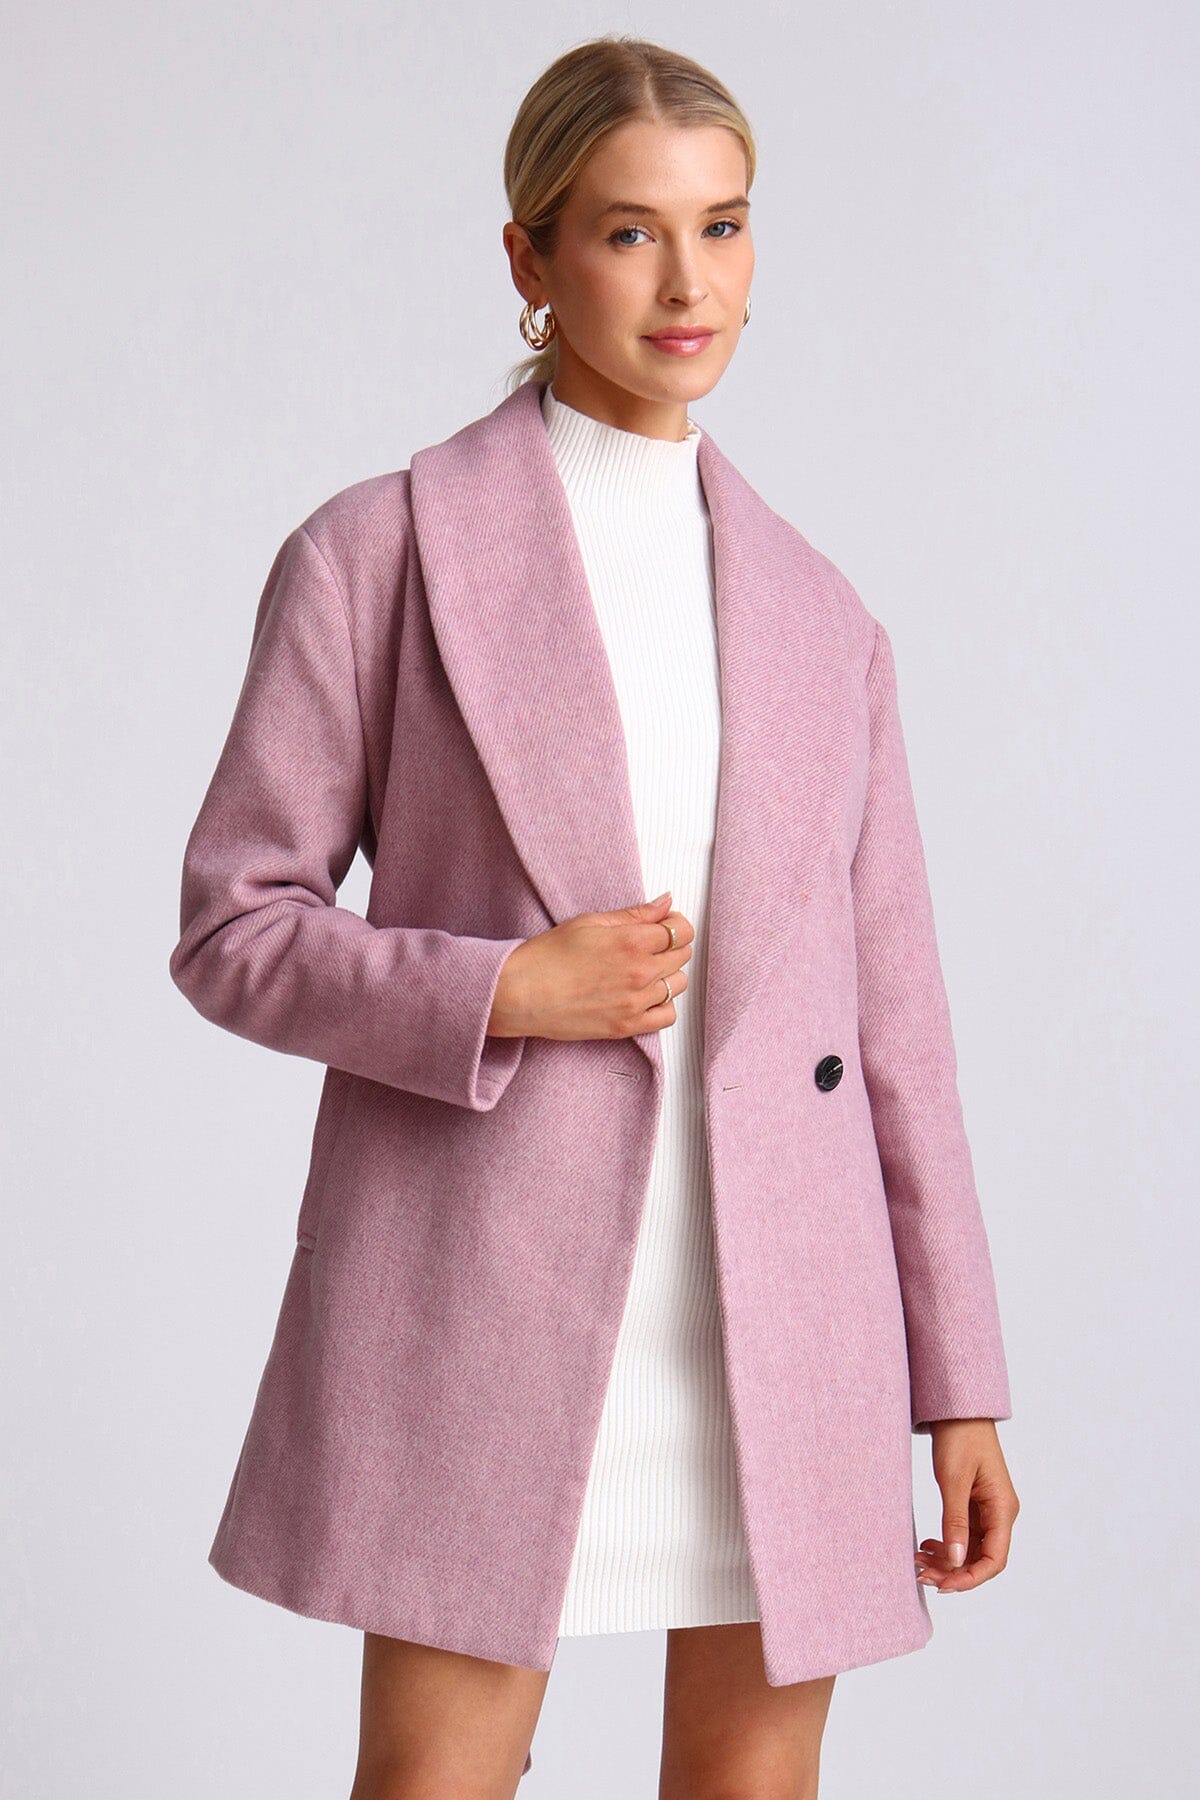 Light purple wool blend belted shawl collar peacoat coat - figure flattering day to night peacoats coats for women